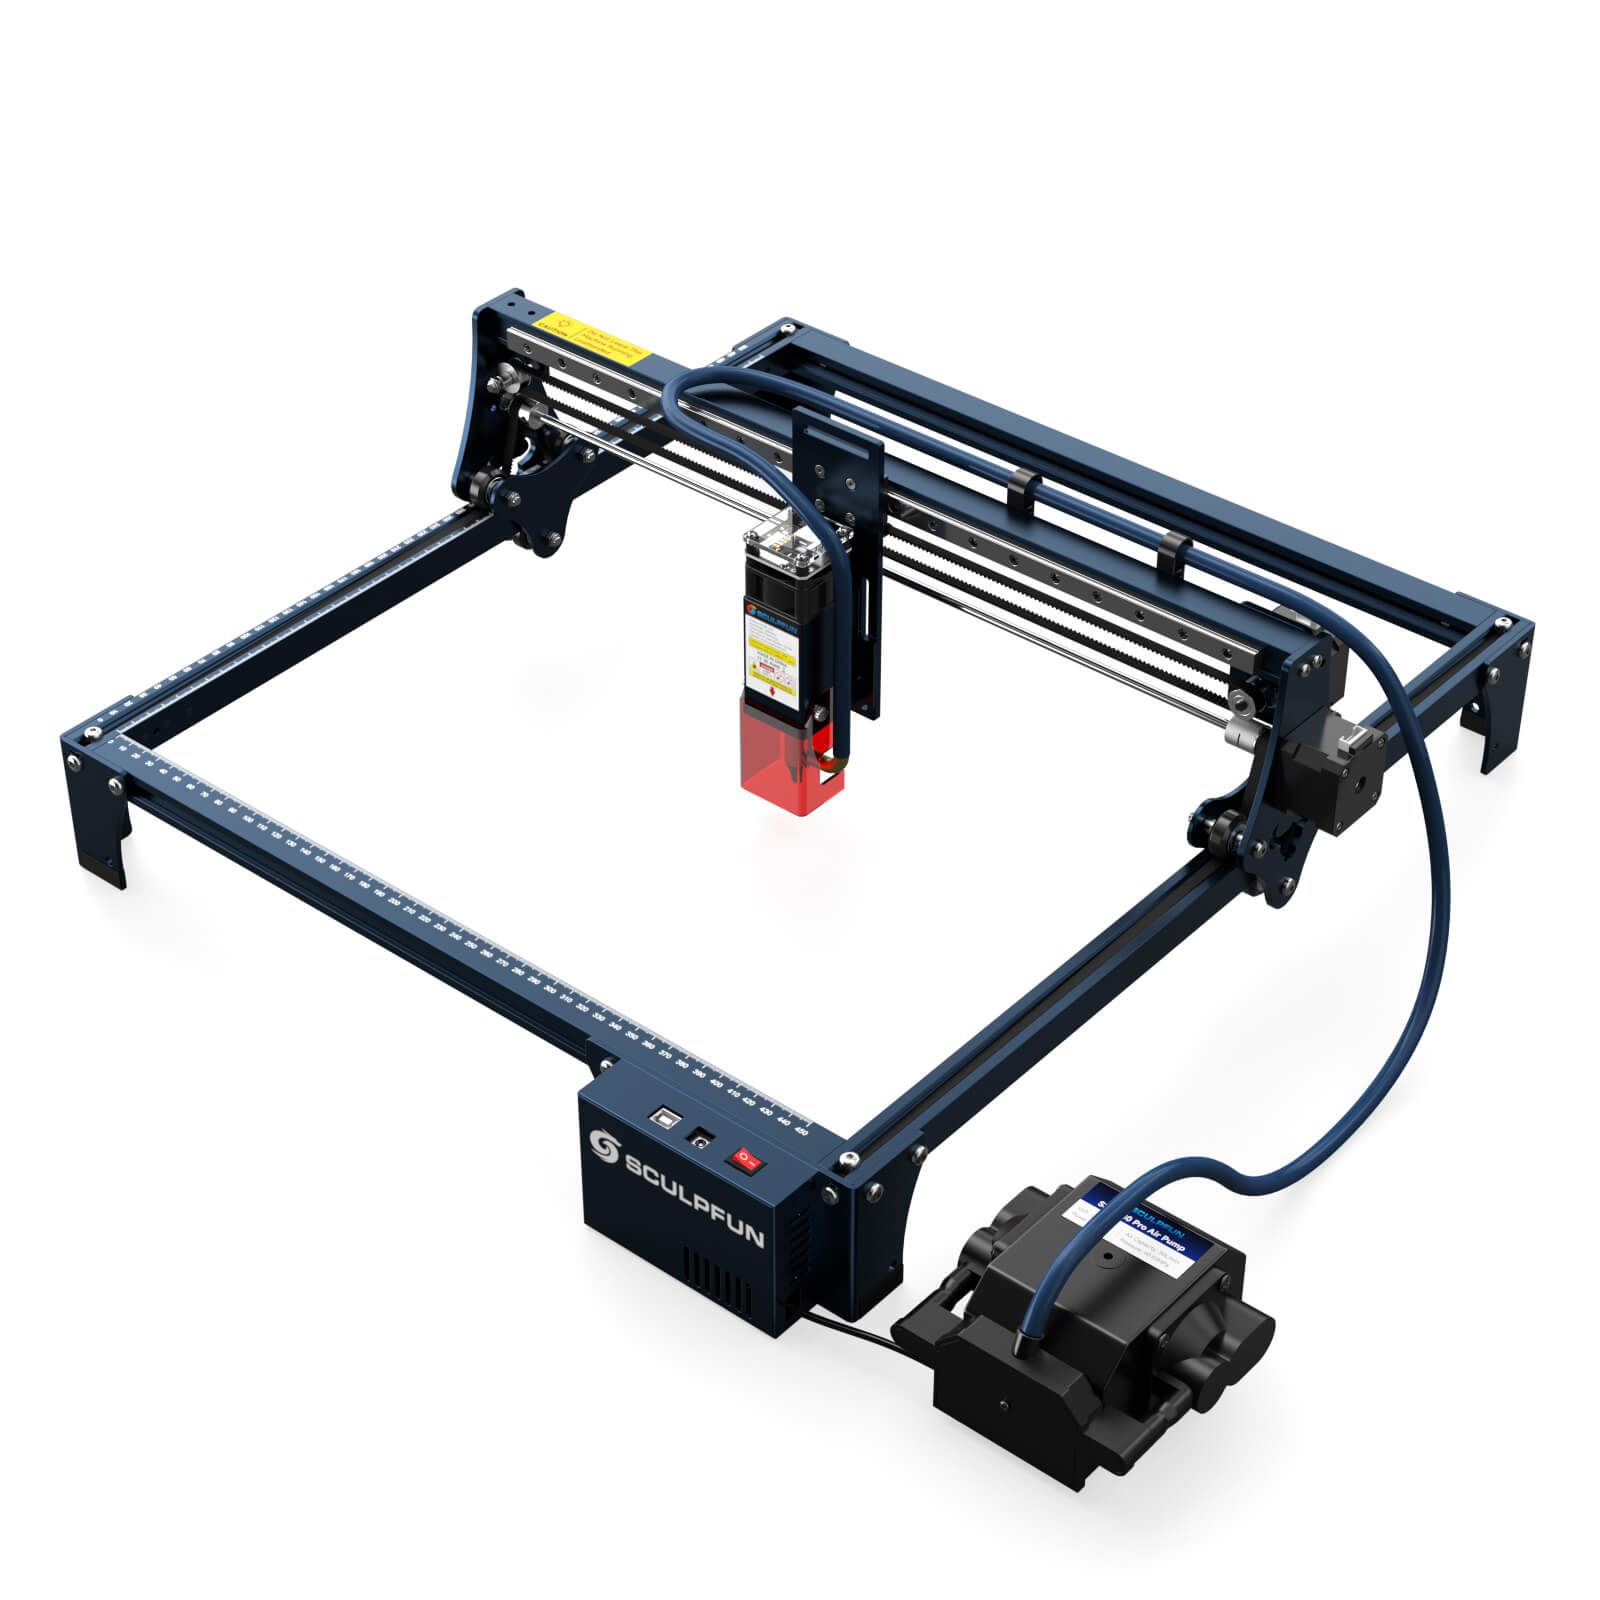 SCULPFUN S30 Series X and Y Axis Expansion Kit